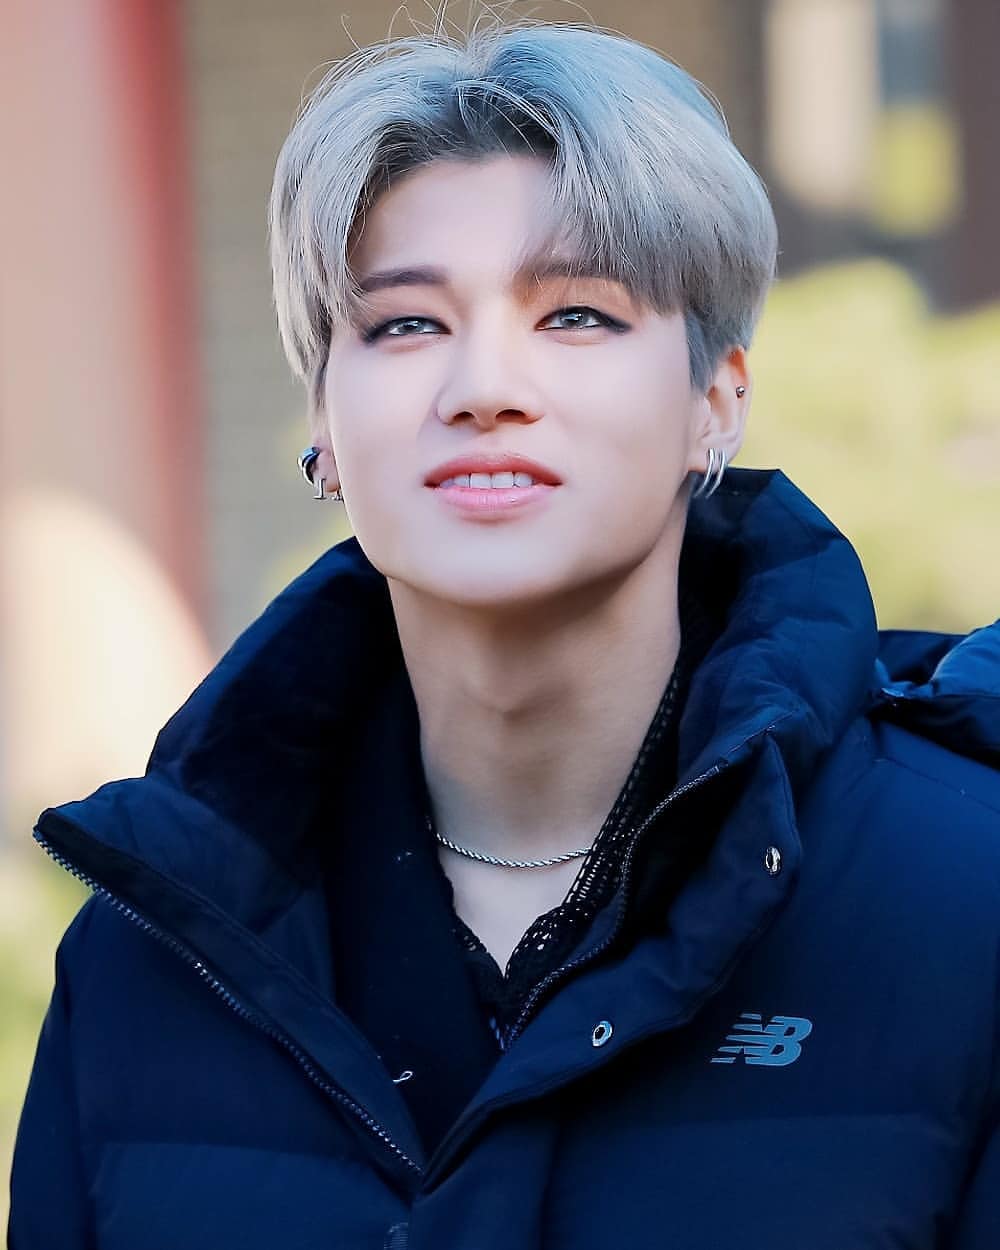 Do you think BTS's Jimin looks like ATEEZ's Wooyoung